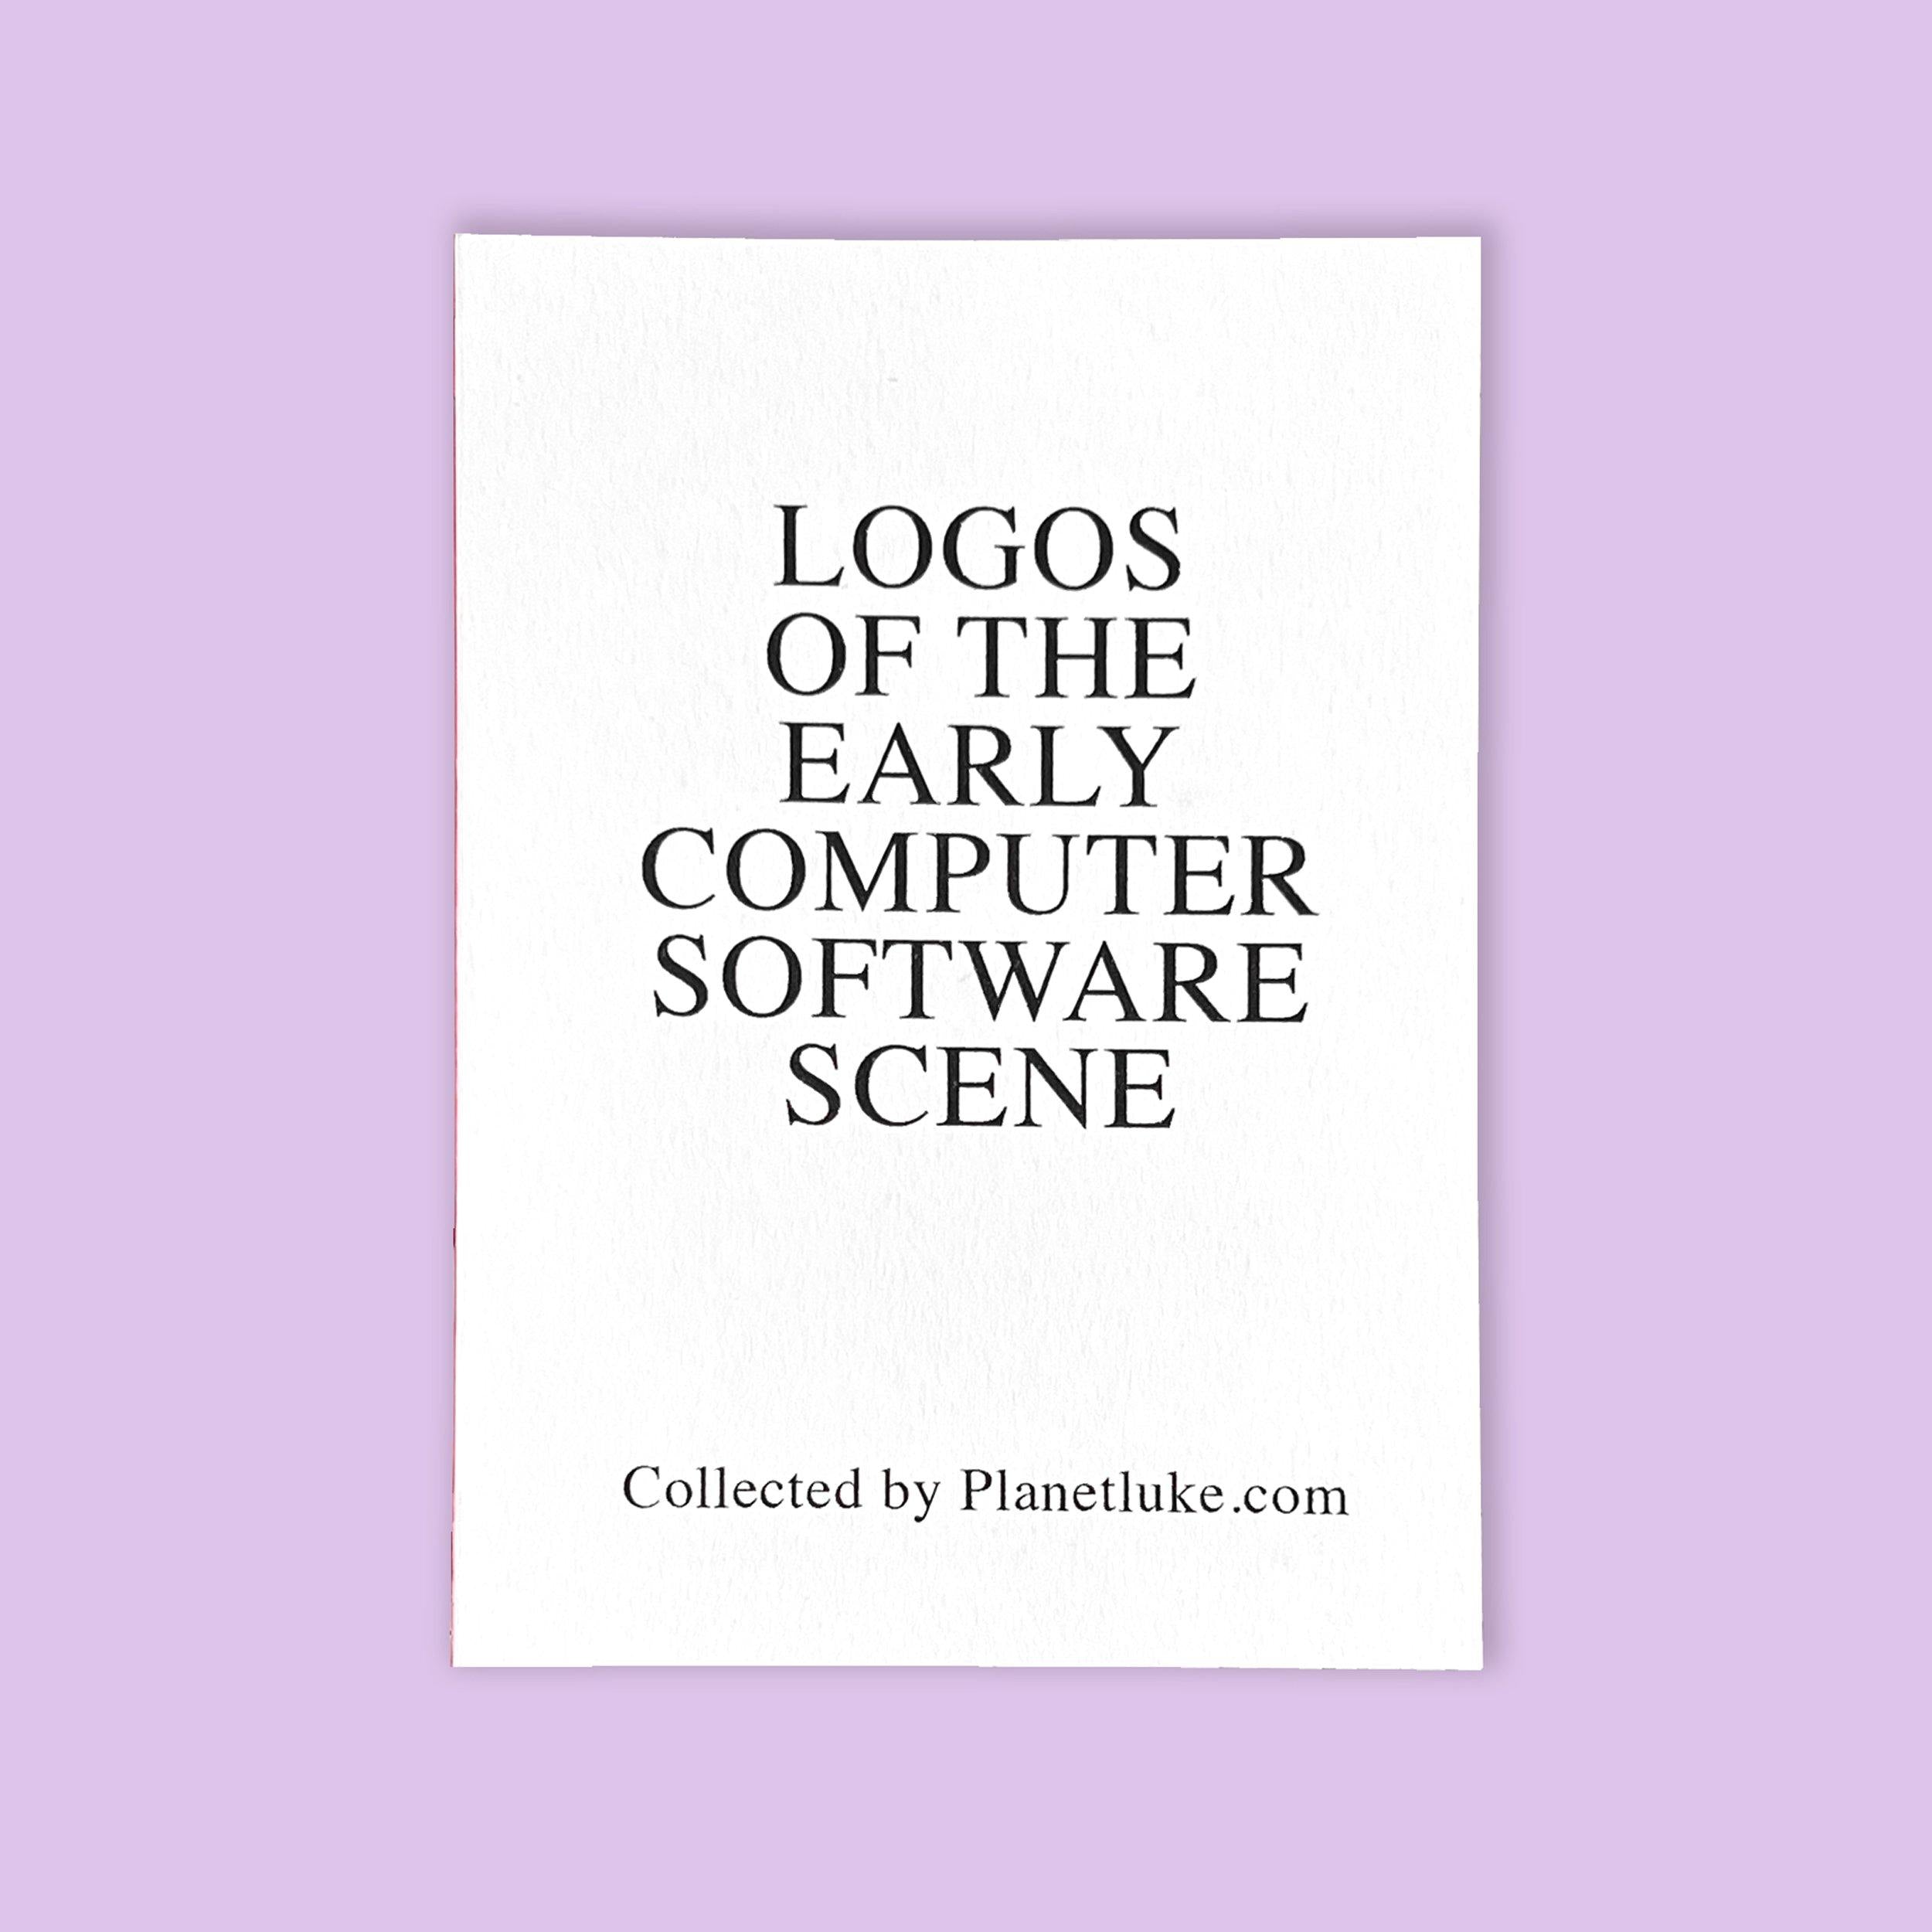 LOGOS OF THE EARLY COMPUTER SOFTWARE SCENE BY LUCA LOZANO